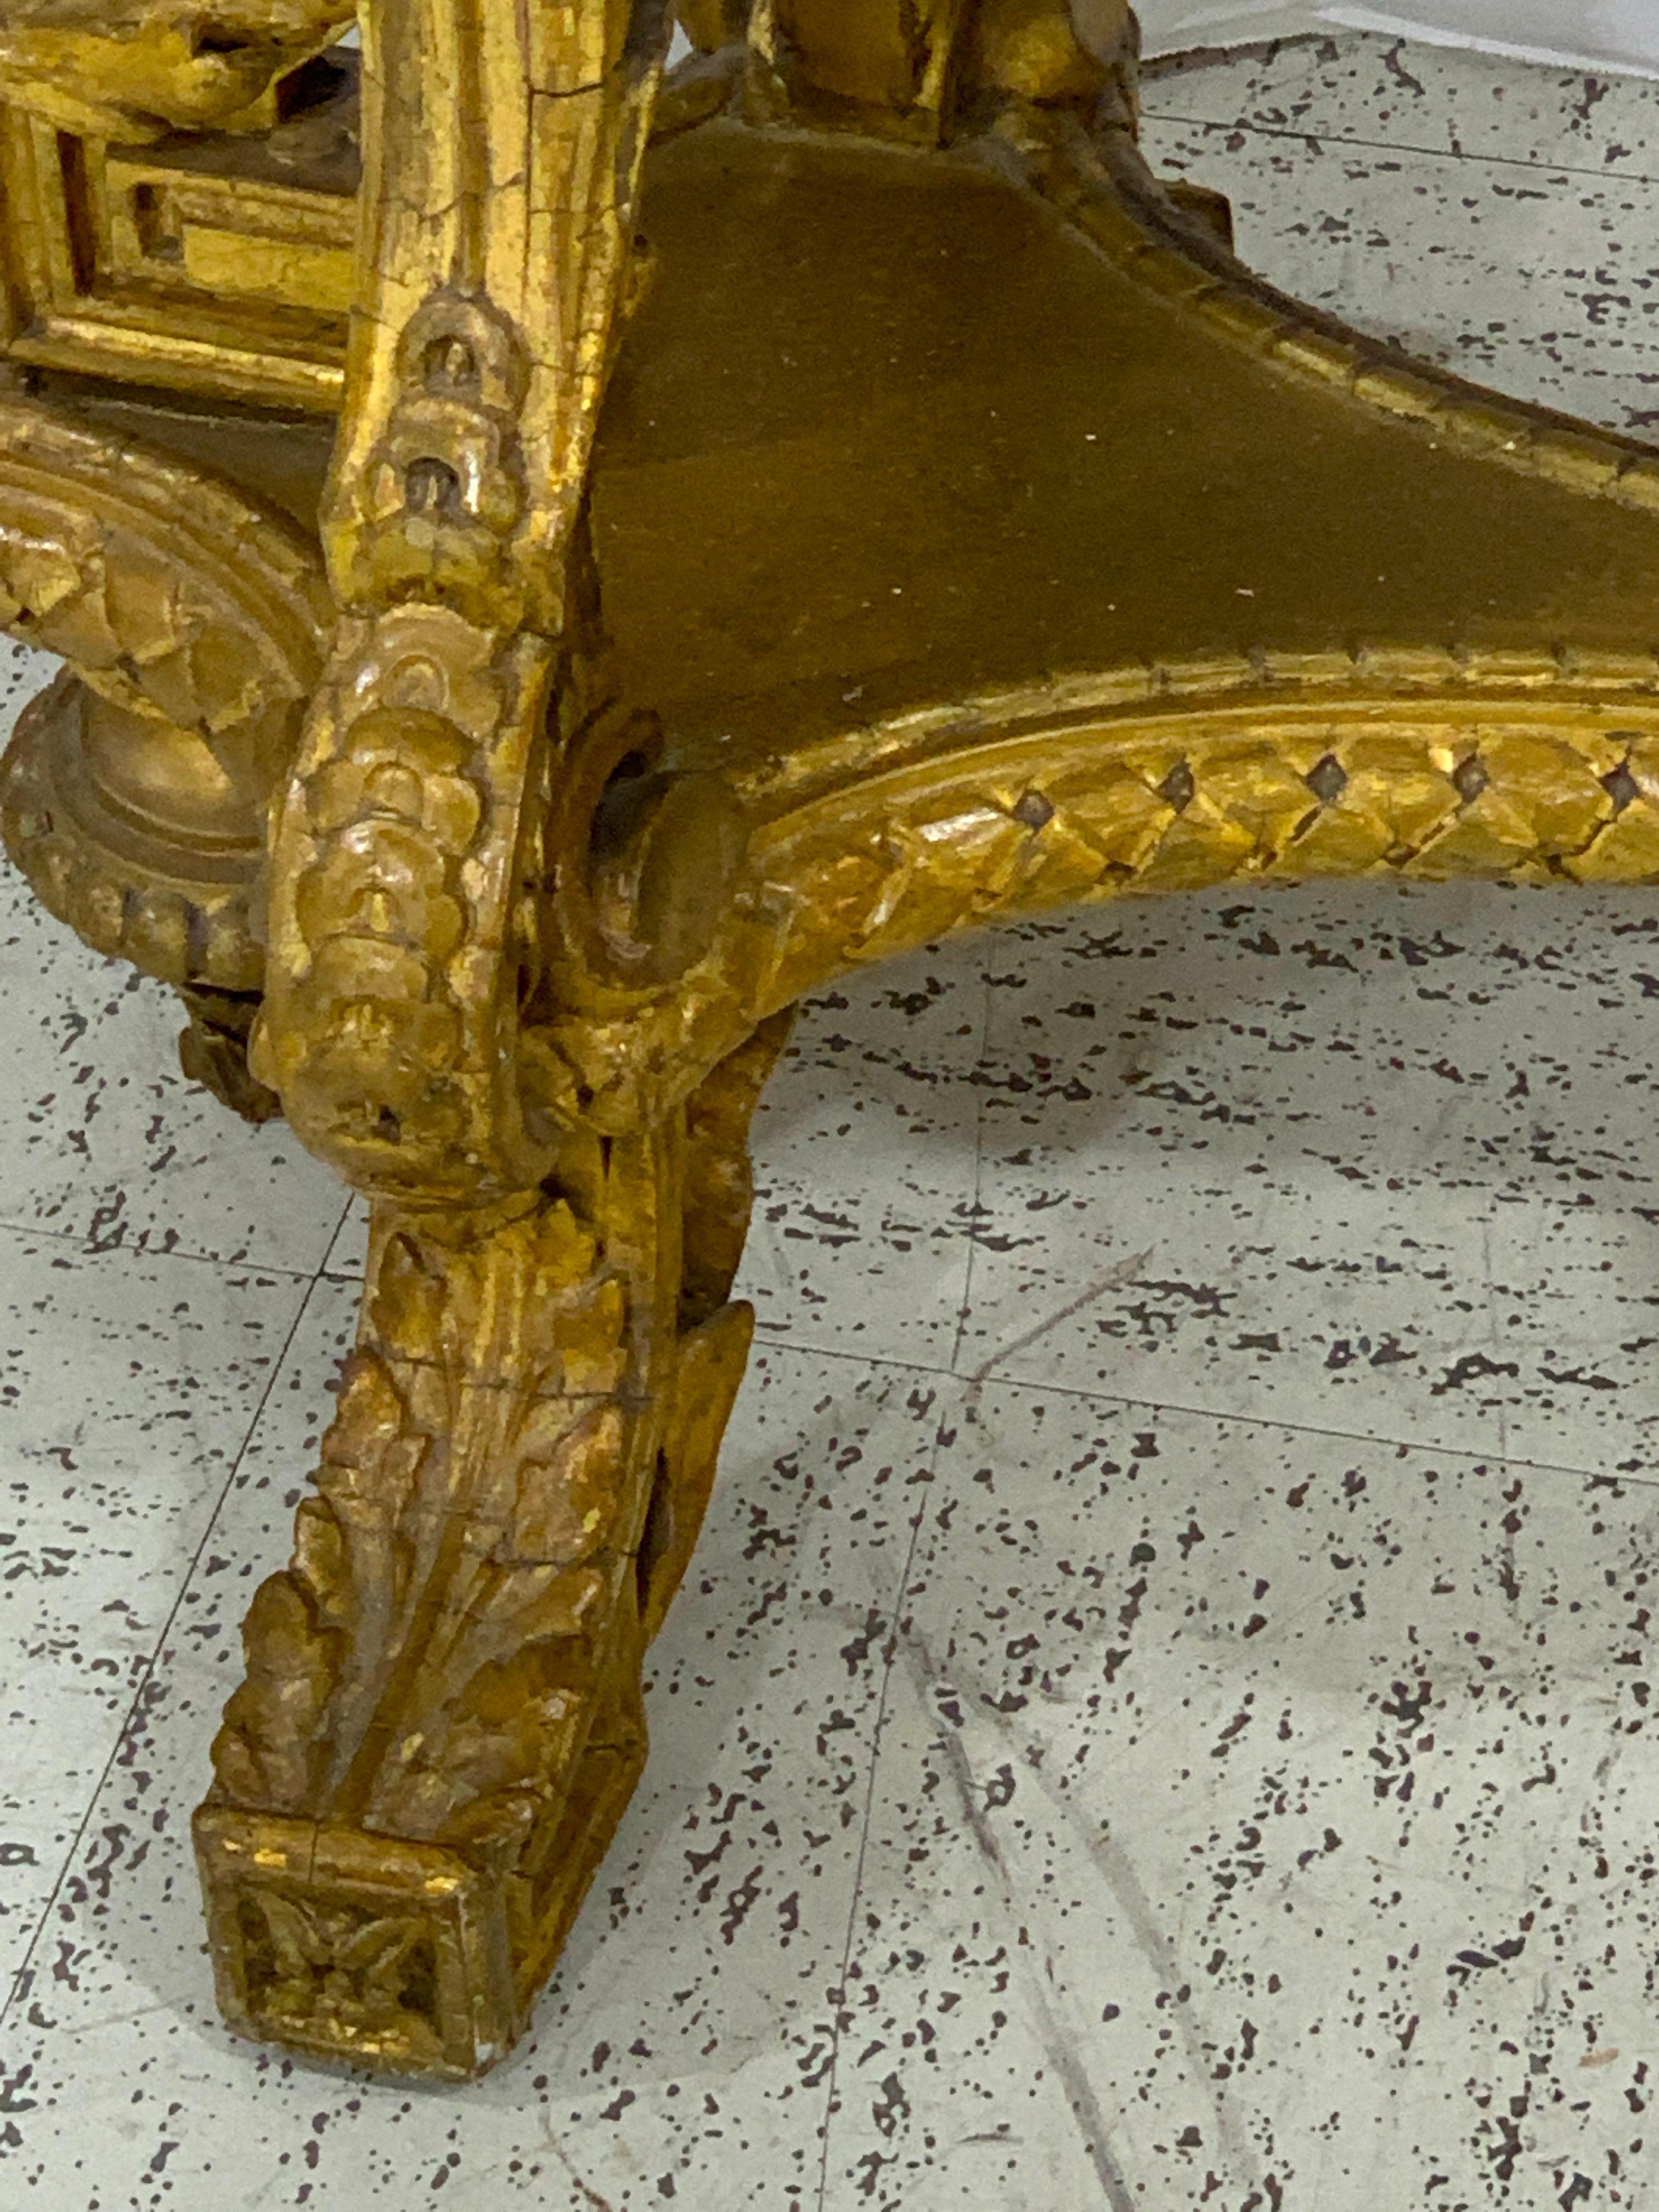 Exquisite French Giltwood Swinging Putto Marble Top Table/ Ferner In Good Condition For Sale In West Palm Beach, FL